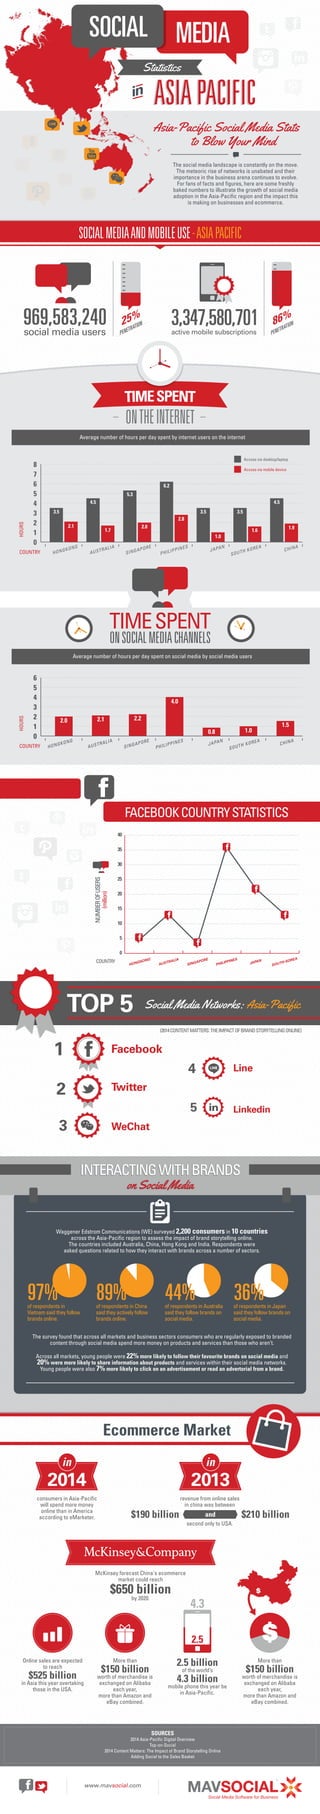 SOCIAL MEDIA 
Statistics 
ASIA PACIFIC 
Asia-Pacific Social Media Stats 
to Blow Your Mind 
The social media landscape is constantly on the move. 
The meteoric rise of networks is unabated and their 
importance in the business arena continues to evolve. 
For fans of facts and figures, here are some freshly 
baked numbers to illustrate the growth of social media 
adoption in the Asia-Pacific region and the impact this 
is making on businesses and ecommerce. 
SOCIAL MEDIA AND MOBILE USE - ASIA PACIFIC 
969,583,240 
social media users 
25% 
PENETRATION 
86% 
PENETRATION 
3,347,580,701 
active mobile subscriptions 
Average number of hours per day spent by internet users on the internet 
TIME SPENT 
ON SOCIAL MEDIA CHANNELS 
Average number of hours per day spent on social media by social media users 
8 
7 
6 
5 
4 
3 
2 
1 
0 
HOURS 
COUNTRY 
Access via desktop/laptop 
Access via mobile device 
H O NGK O N G 
A U STR A LIA 
SIN G A P O R E 
PHIL I PP I NES 
J A PA N 
S O U T H K O REA 
CH IN A 
3.5 
4.5 
5.3 
6.2 
3.5 3.5 
4.5 
2.1 
1.7 
2.0 
2.8 
1.0 
1.6 1.9 
6 
5 
4 
3 
2 
1 
0 
HOURS 
COUNTRY HON G K O N G 
A U STR A LIA 
SI N G A POR E 
PHIL I PP I NES 
JAPAN 
S O U T H K O REA 
C H I NA 
2.0 2.1 2.2 
4.0 
0.8 1.0 
1.5 
FACEBOOK COUNTRY STATISTICS 
40 
35 
30 
25 
20 
15 
10 
5 
0 
HONGKONG 
AUSTRALIA 
SINGAPORE 
PHILIPPINES 
JAPAN 
SOUTH KOREA 
NUMBER OF USERS 
(million) 
COUNTRY 
TOP 5 Social Media Networks: Asia-Pacific 
(2014 CONTENT MATTERS: THE IMPACT OF BRAND STORYTELLING ONLINE) 
1 
2 
3 
4 
5 
Facebook 
Twitter 
WeChat 
Line 
Linkedin 
INTERACTING WITH BRANDS 
on Social Media 
Waggener Edstrom Communications (WE) surveyed 2,200 consumers in 10 countries 
across the Asia-Pacific region to assess the impact of brand storytelling online. 
The countries included Australia, China, Hong Kong and India. Respondents were 
asked questions related to how they interact with brands across a number of sectors. 
97% 
of respondents in 
Vietnam said they follow 
brands online. 
89% 
of respondents in China 
said they actively follow 
brands online. 
44% 
of respondents in Australia 
said they follow brands on 
social media. 
36% 
of respondents in Japan 
said they follow brands on 
social media. 
The survey found that across all markets and business sectors consumers who are regularly exposed to branded 
content through social media spend more money on products and services than those who aren’t. 
Across all markets, young people were 22% more likely to follow their favourite brands on social media and 
20% were more likely to share information about products and services within their social media networks. 
Young people were also 7% more likely to click on an advertisement or read an advertorial from a brand. 
Ecommerce Market 
in 
2014 
consumers in Asia-Pacific 
will spend more money 
online than in America 
according to eMarketer. 
in 
2013 
revenue from online sales 
in china was between 
$190 billion and $210 billion 
second only to USA. 
McKinsey forecast China's ecommerce 
market could reach 
$650 billion 
by 2020. 
Online sales are expected 
to reach 
$525 billion 
in Asia this year overtaking 
those in the USA. 
More than 
$150 billion 
worth of merchandise is 
exchanged on Alibaba 
each year, 
more than Amazon and 
eBay combined. 
4.3 
2.5 billion 
of the world’s 
4.3 billion 
mobile phone this year be 
in Asia-Pacific. 
More than 
$150 billion 
worth of merchandise is 
exchanged on Alibaba 
each year, 
more than Amazon and 
eBay combined. 
2.5 
$ 
$ 
SOURCES 
2014 Asia-Pacific Digital Overview 
Top-on-Social 
2014 Content Matters: The Impact of Brand Storytelling Online 
Adding Social to the Sales Basket 
htp:/www.facebok.com/mavsocial htps://twiter.com/Mav_Social www.mavsocial.com www.mavsocial.com 
